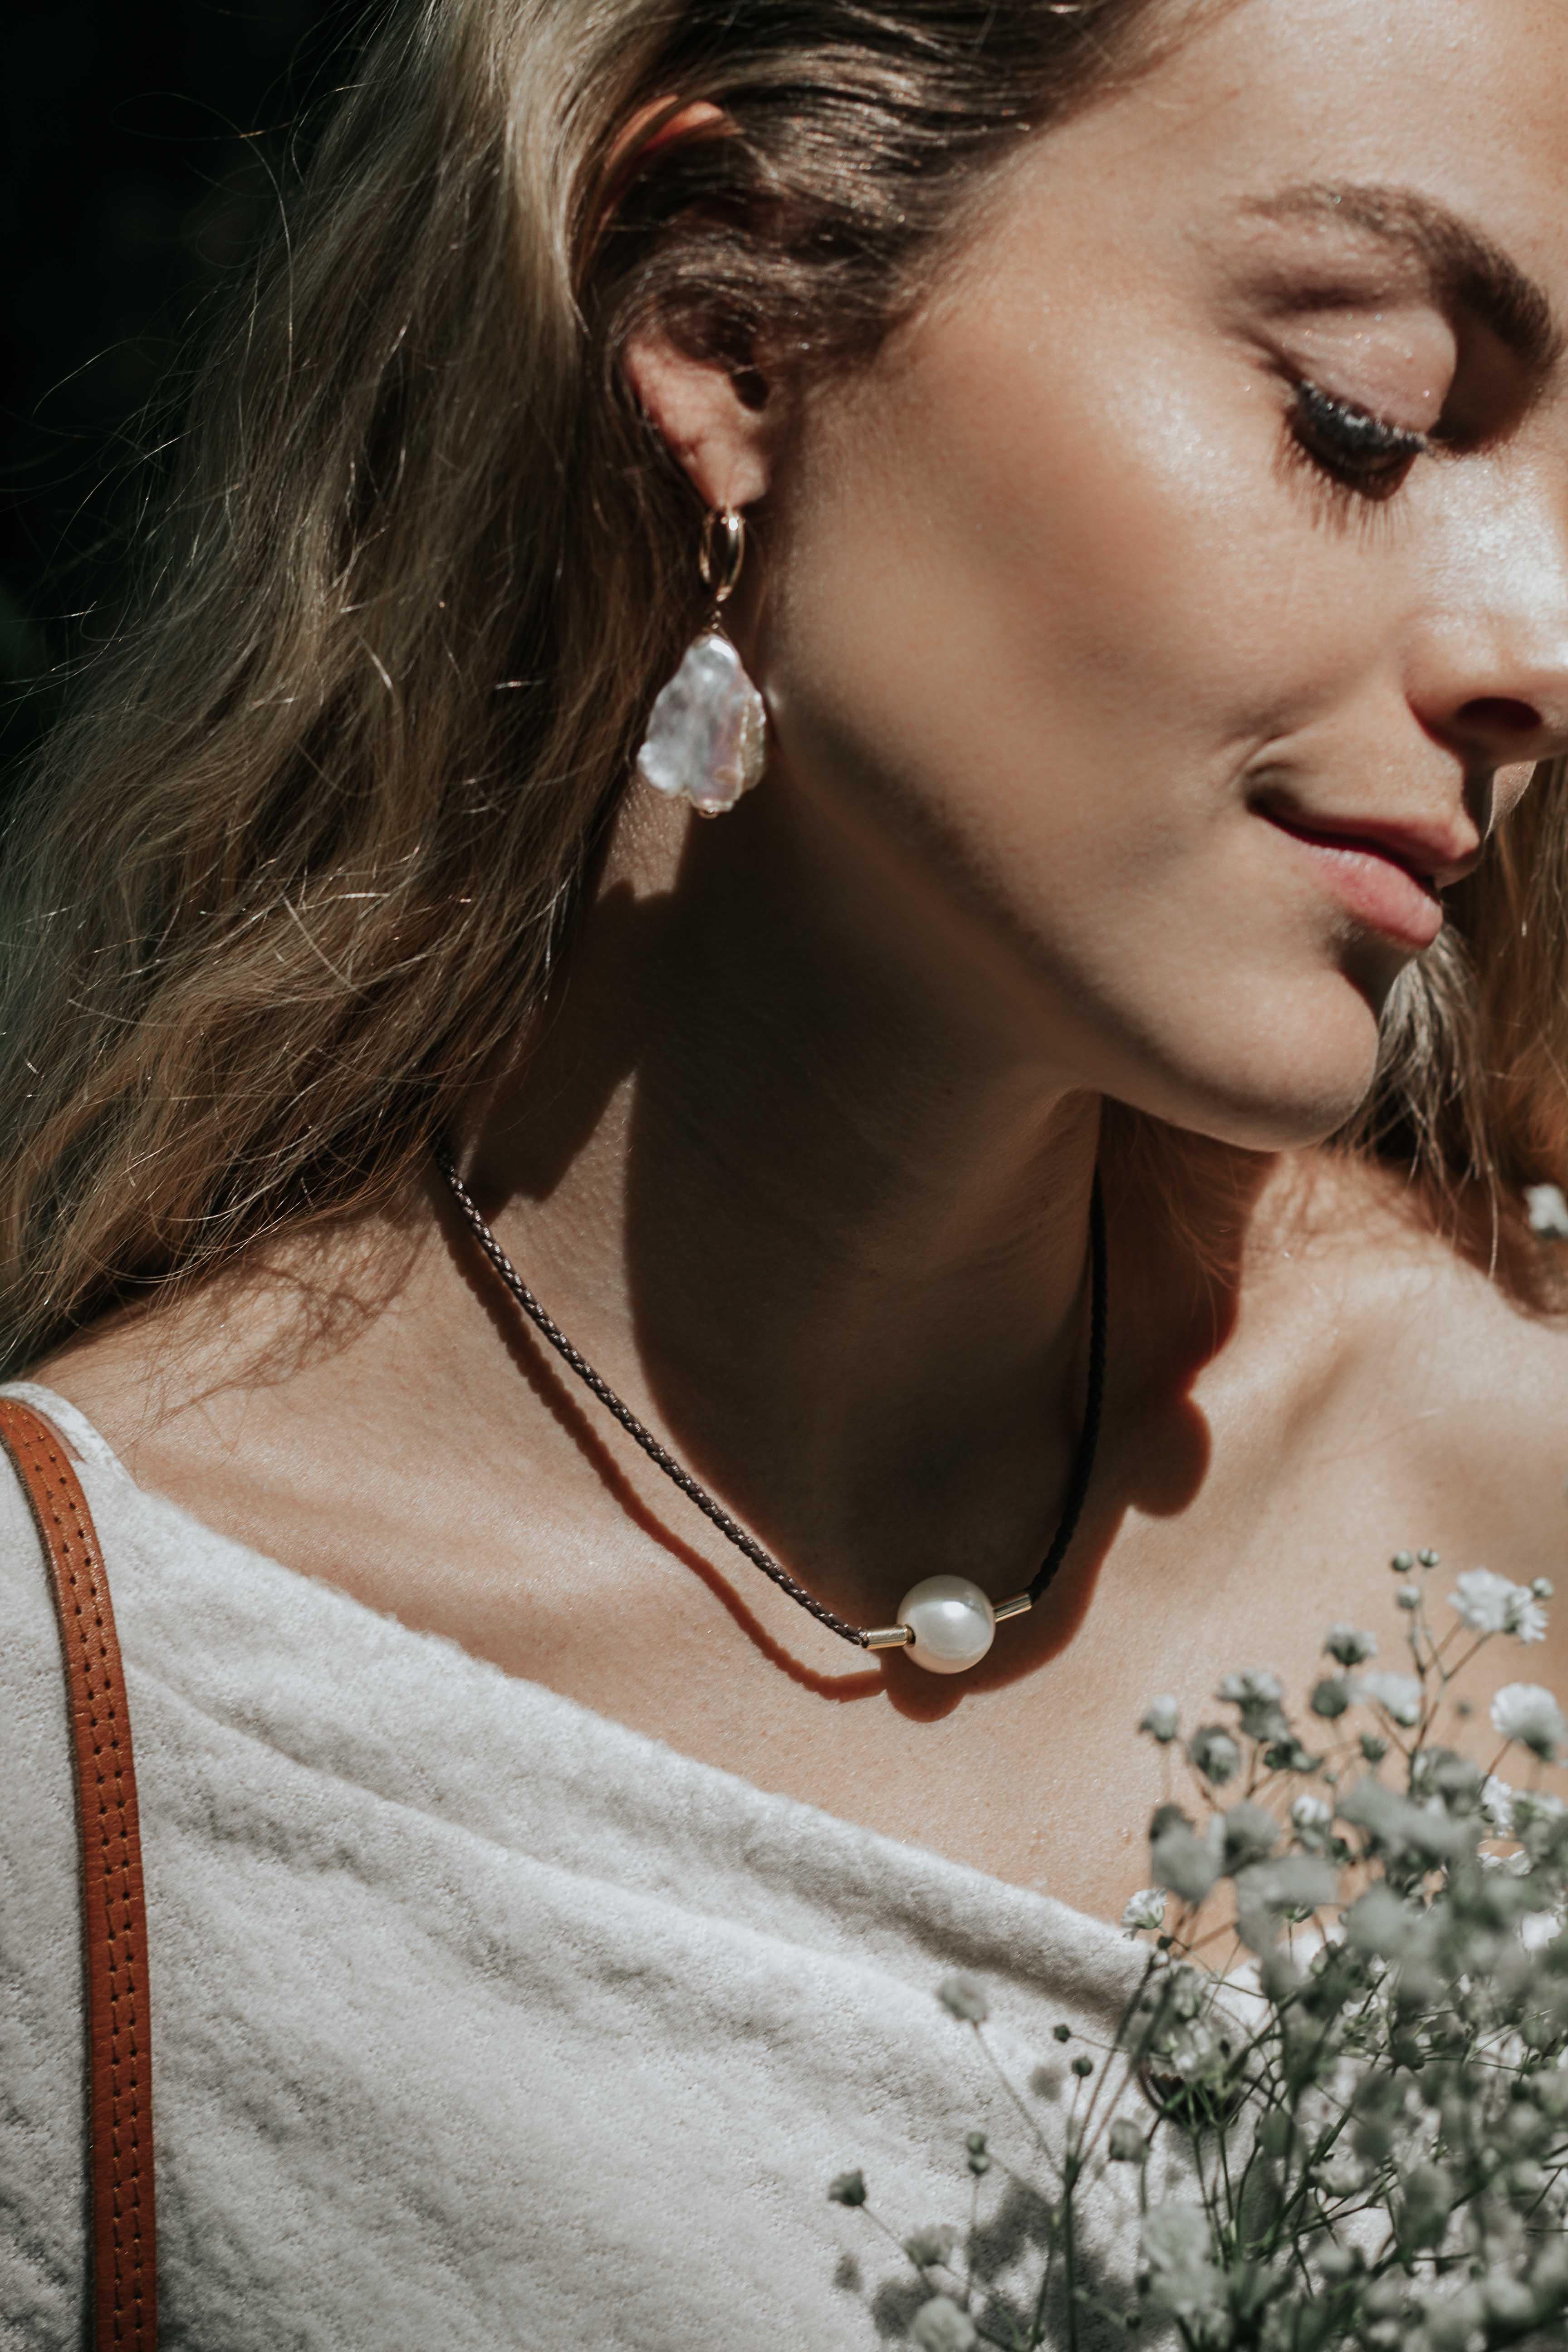 Part of the Vincent Peach Pearl Collection, the Meridian Necklace has a Freshwater Pearl on premium leather with a push/twist locking mechanism that means you can switch out which pearl you want to wear.

Wear it as a choker or a bracelet. The